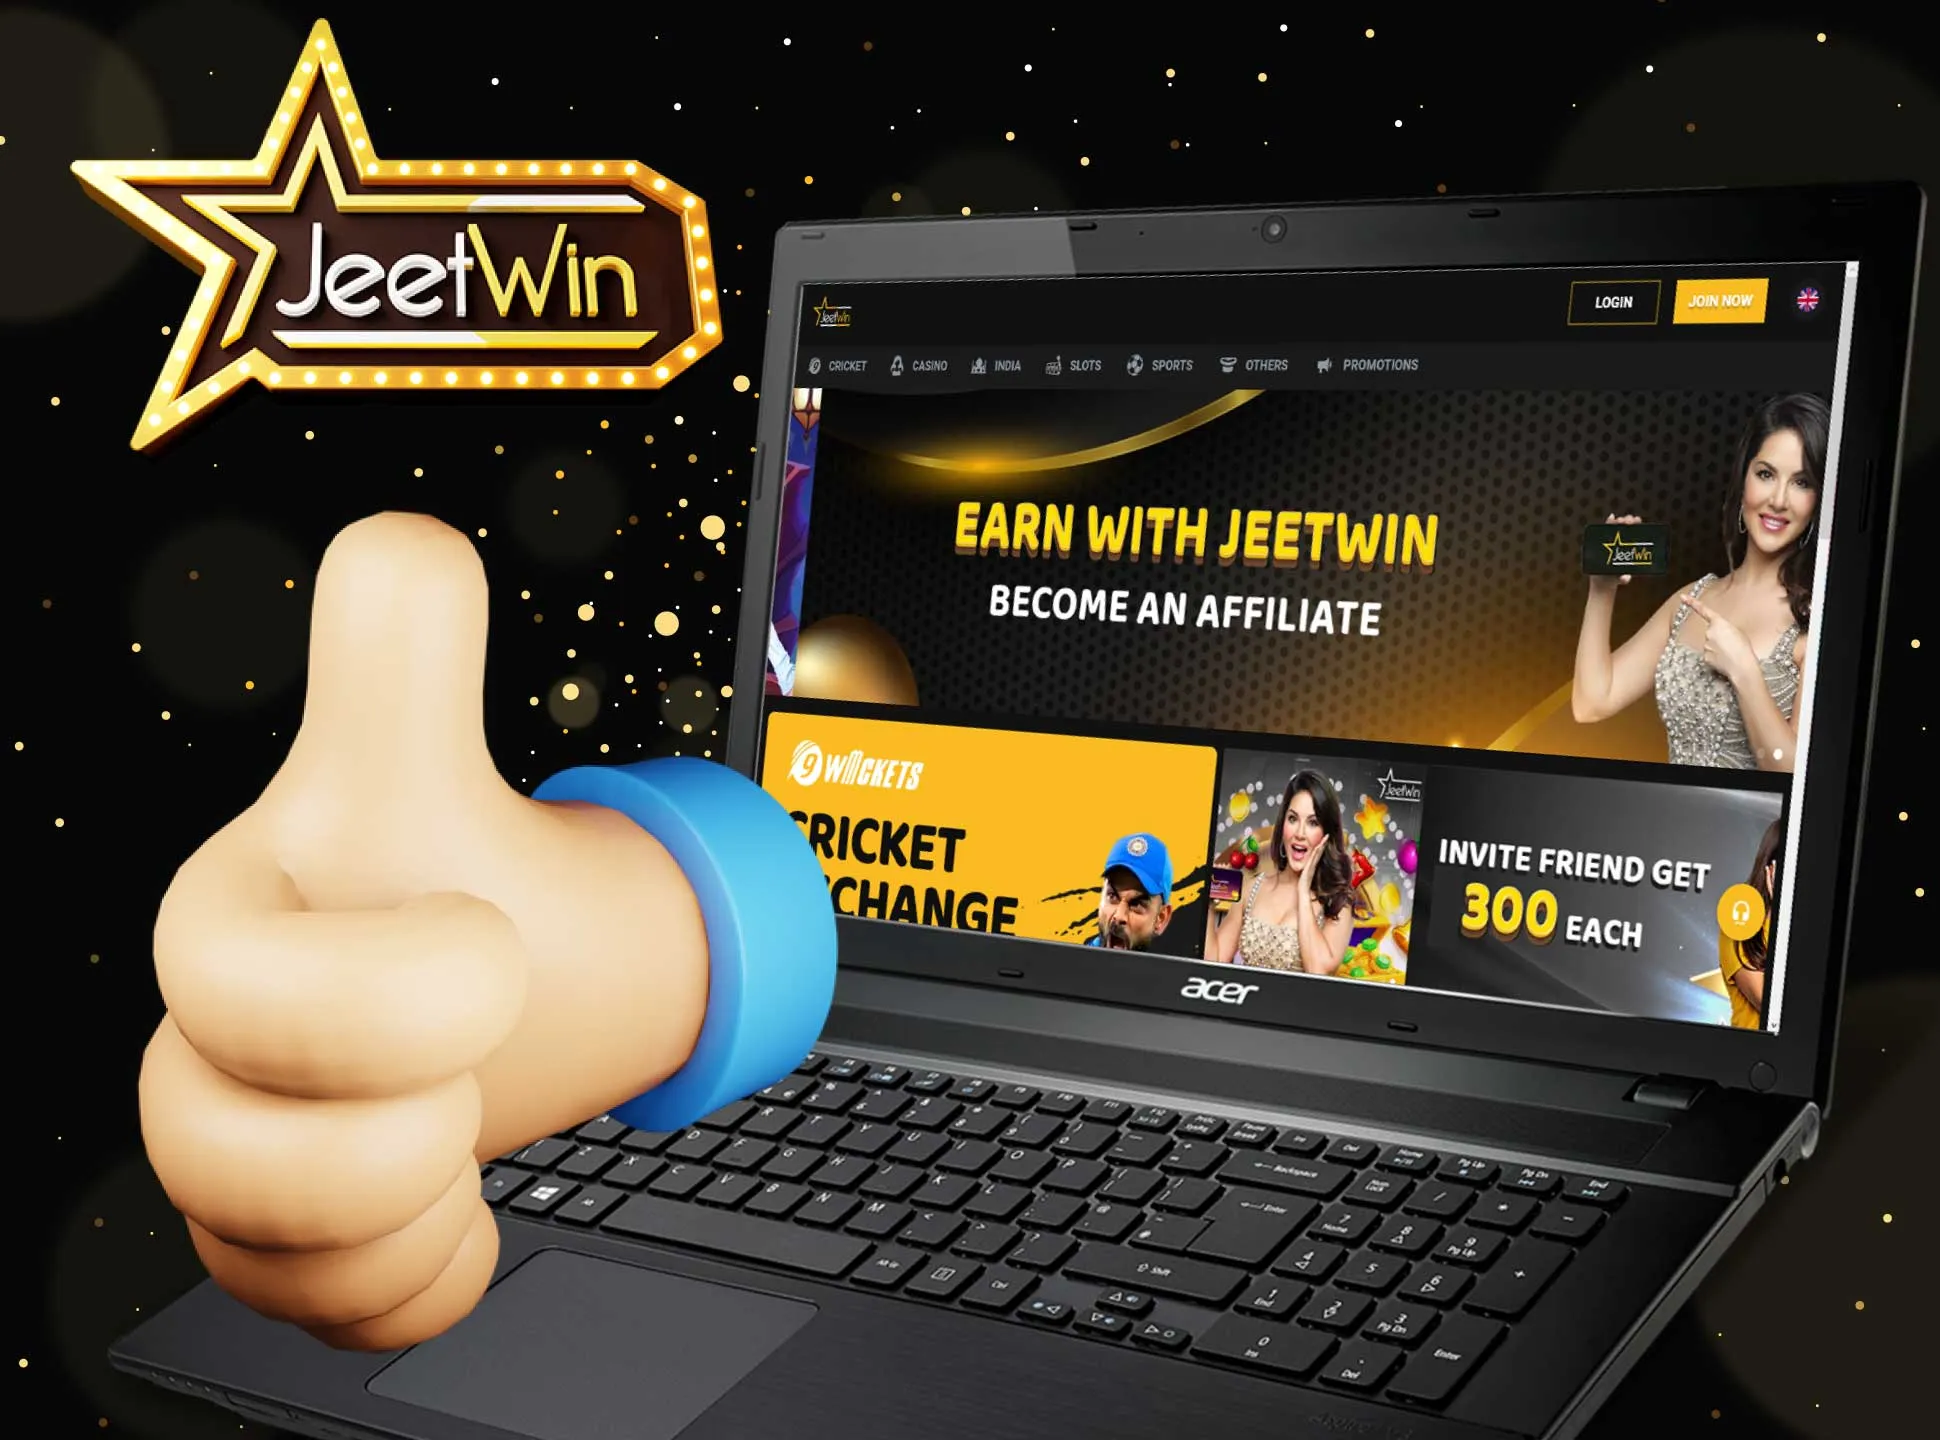 Go to the Jeetwin official website, create an account and start betting on sports.